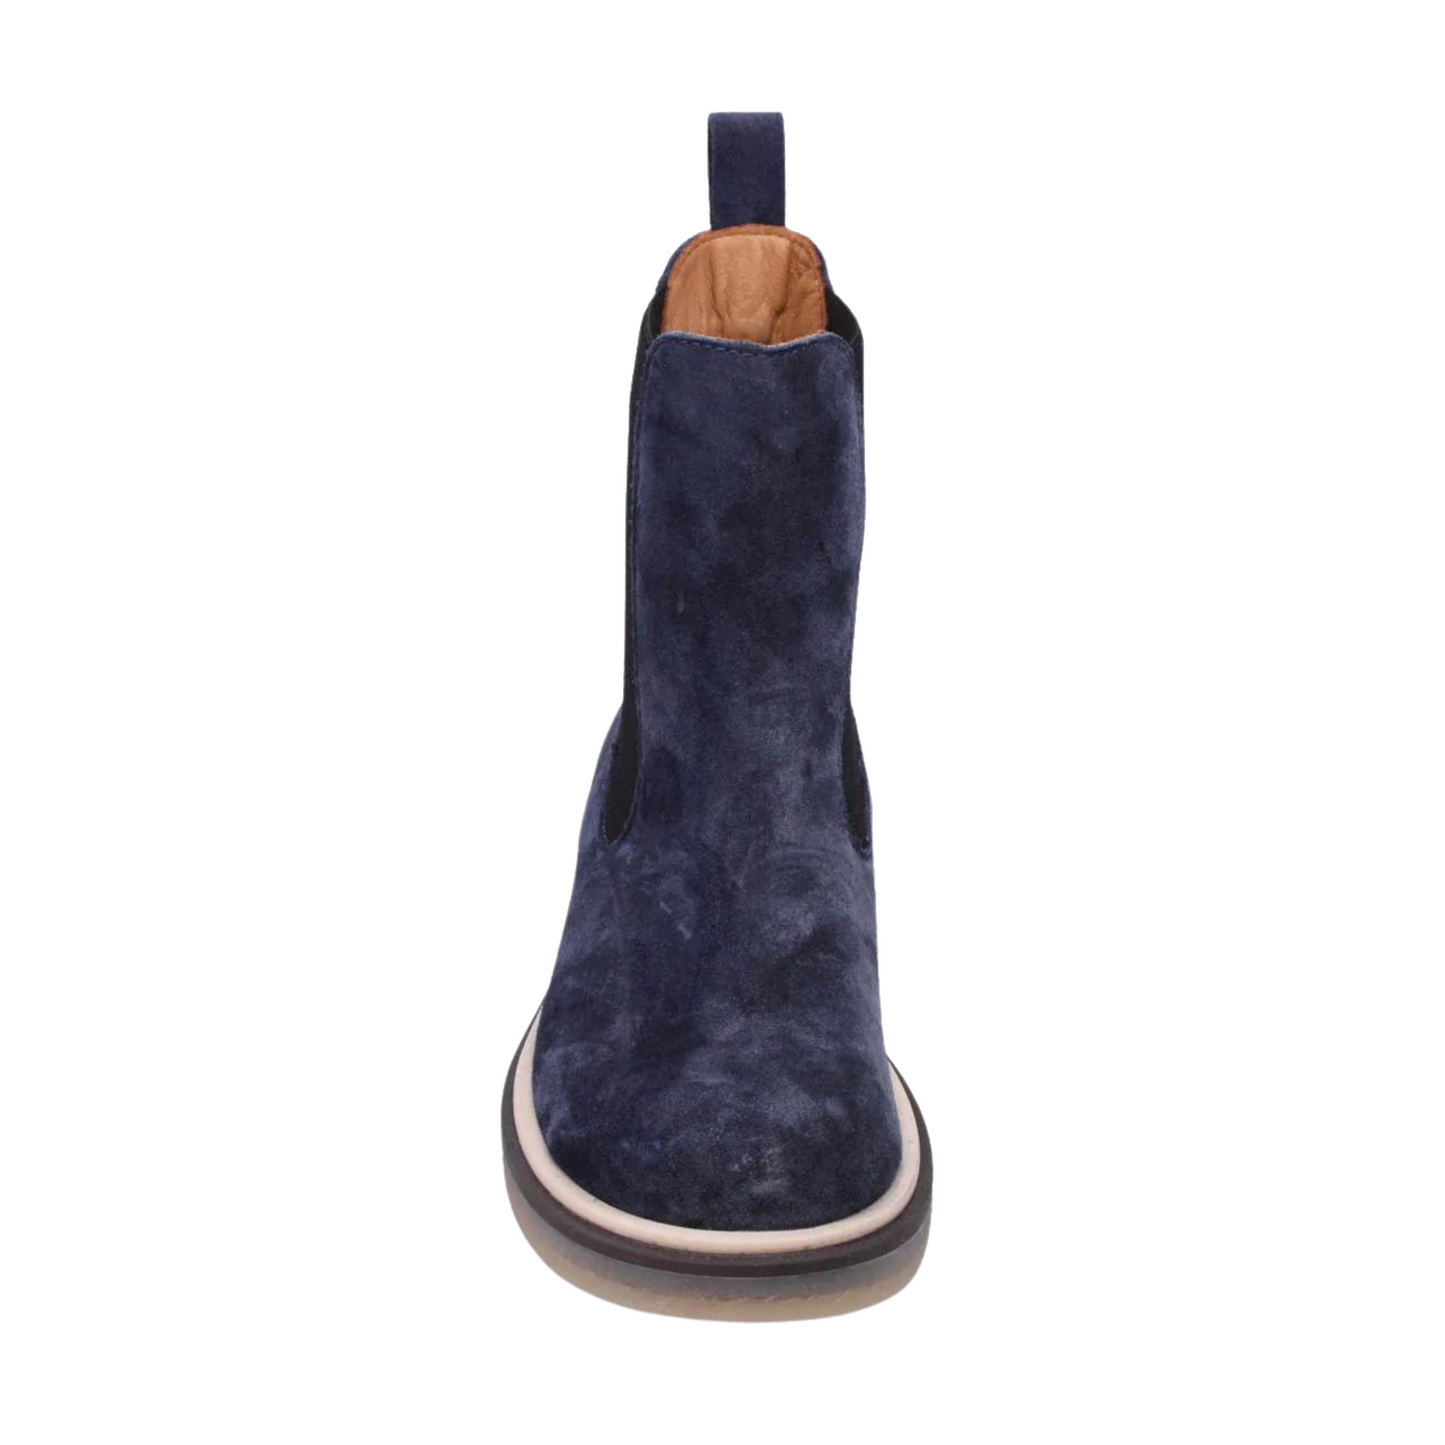 A front view of a navy suede Chelsea boot.